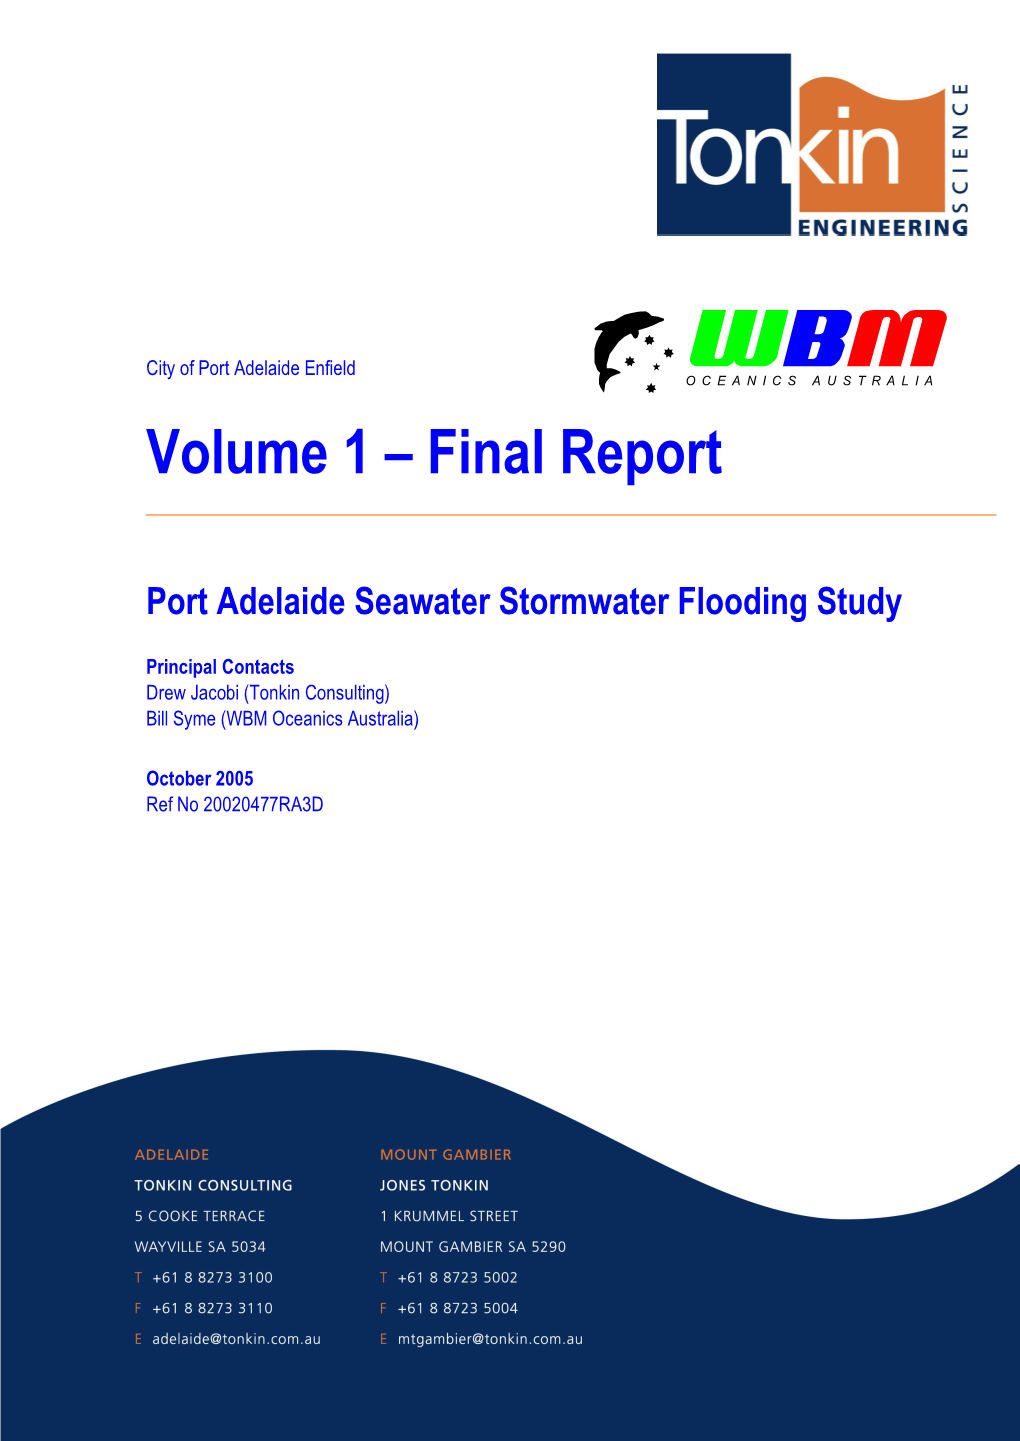 Port Adelaide Seawater Stormwater Flooding Study